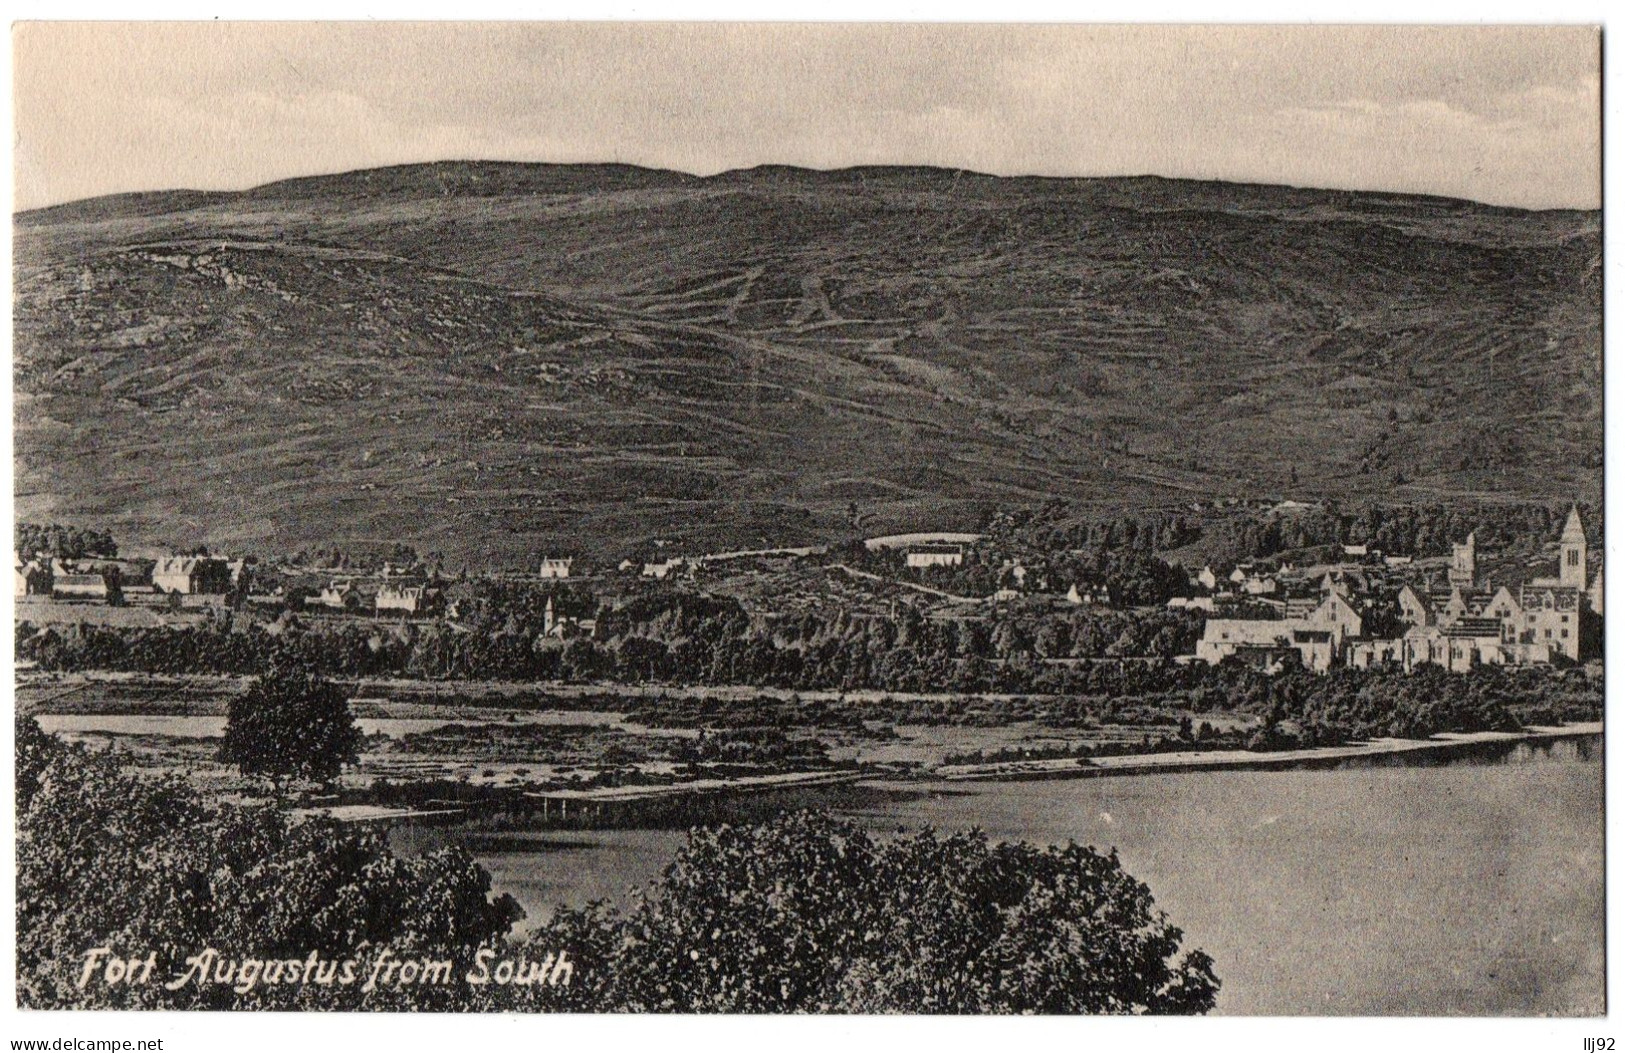 CPA ROYAUME UNI - FORT AUGUSTUS From South - UK - Old Postcard  - Inverness-shire